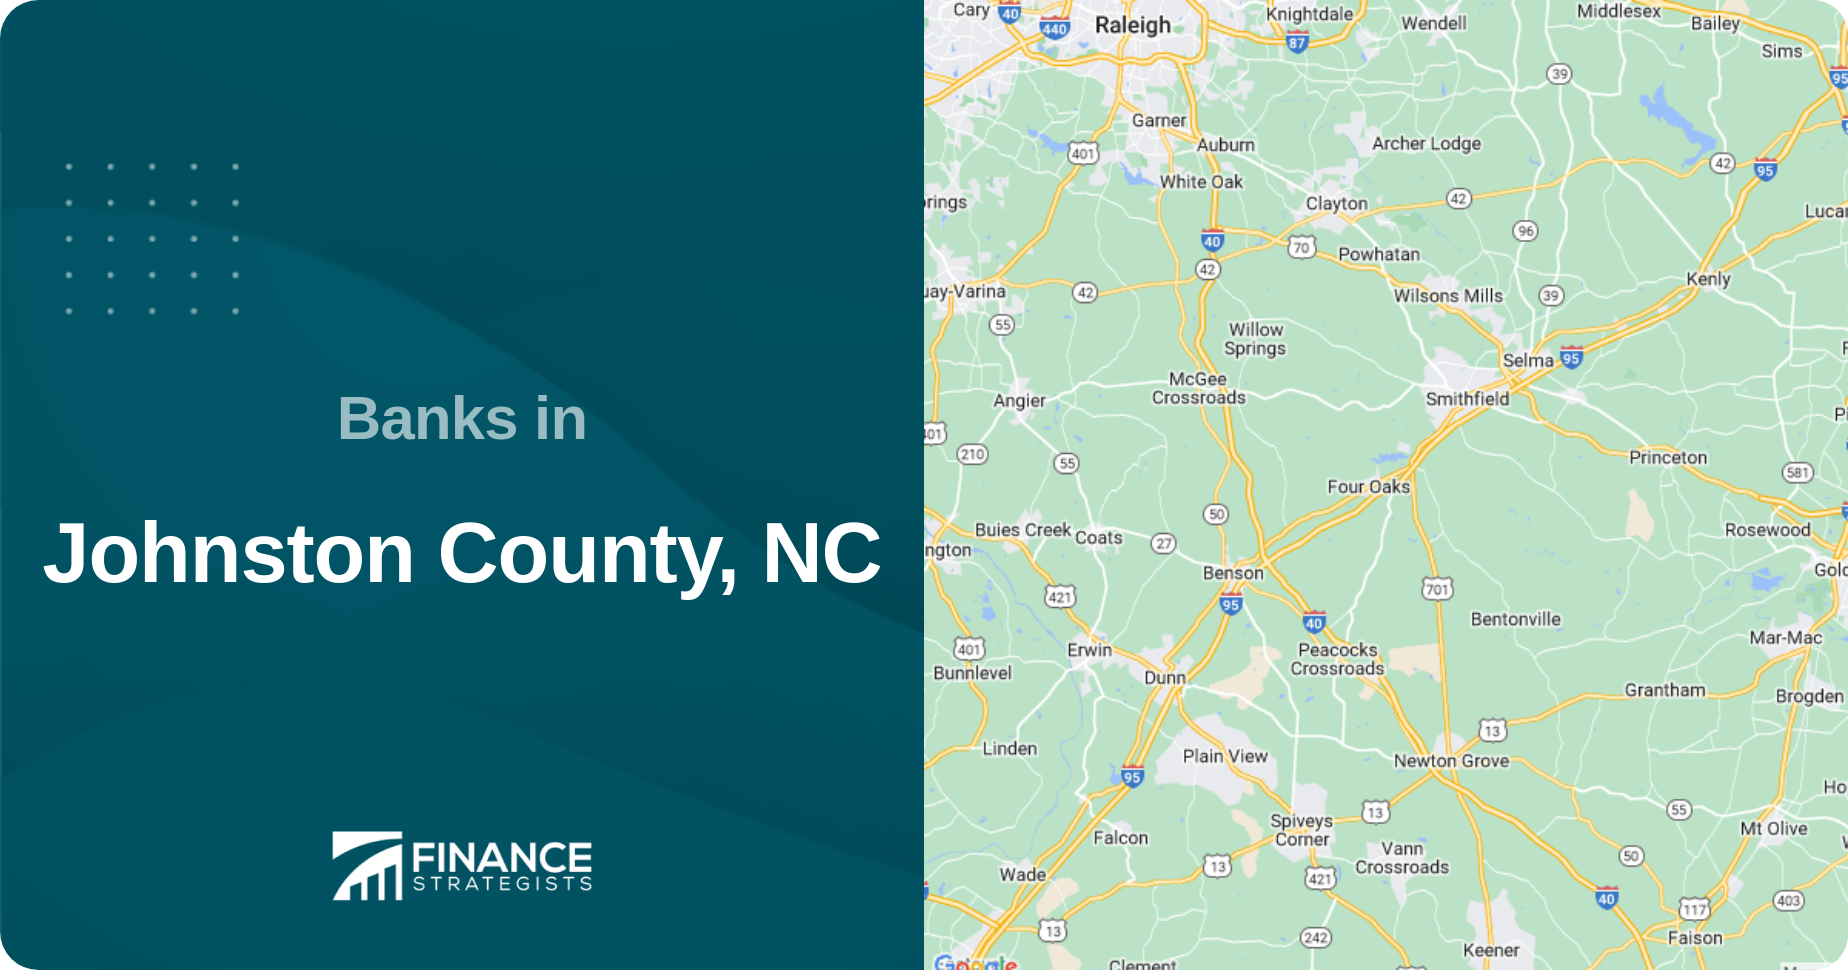 Banks in Johnston County, NC